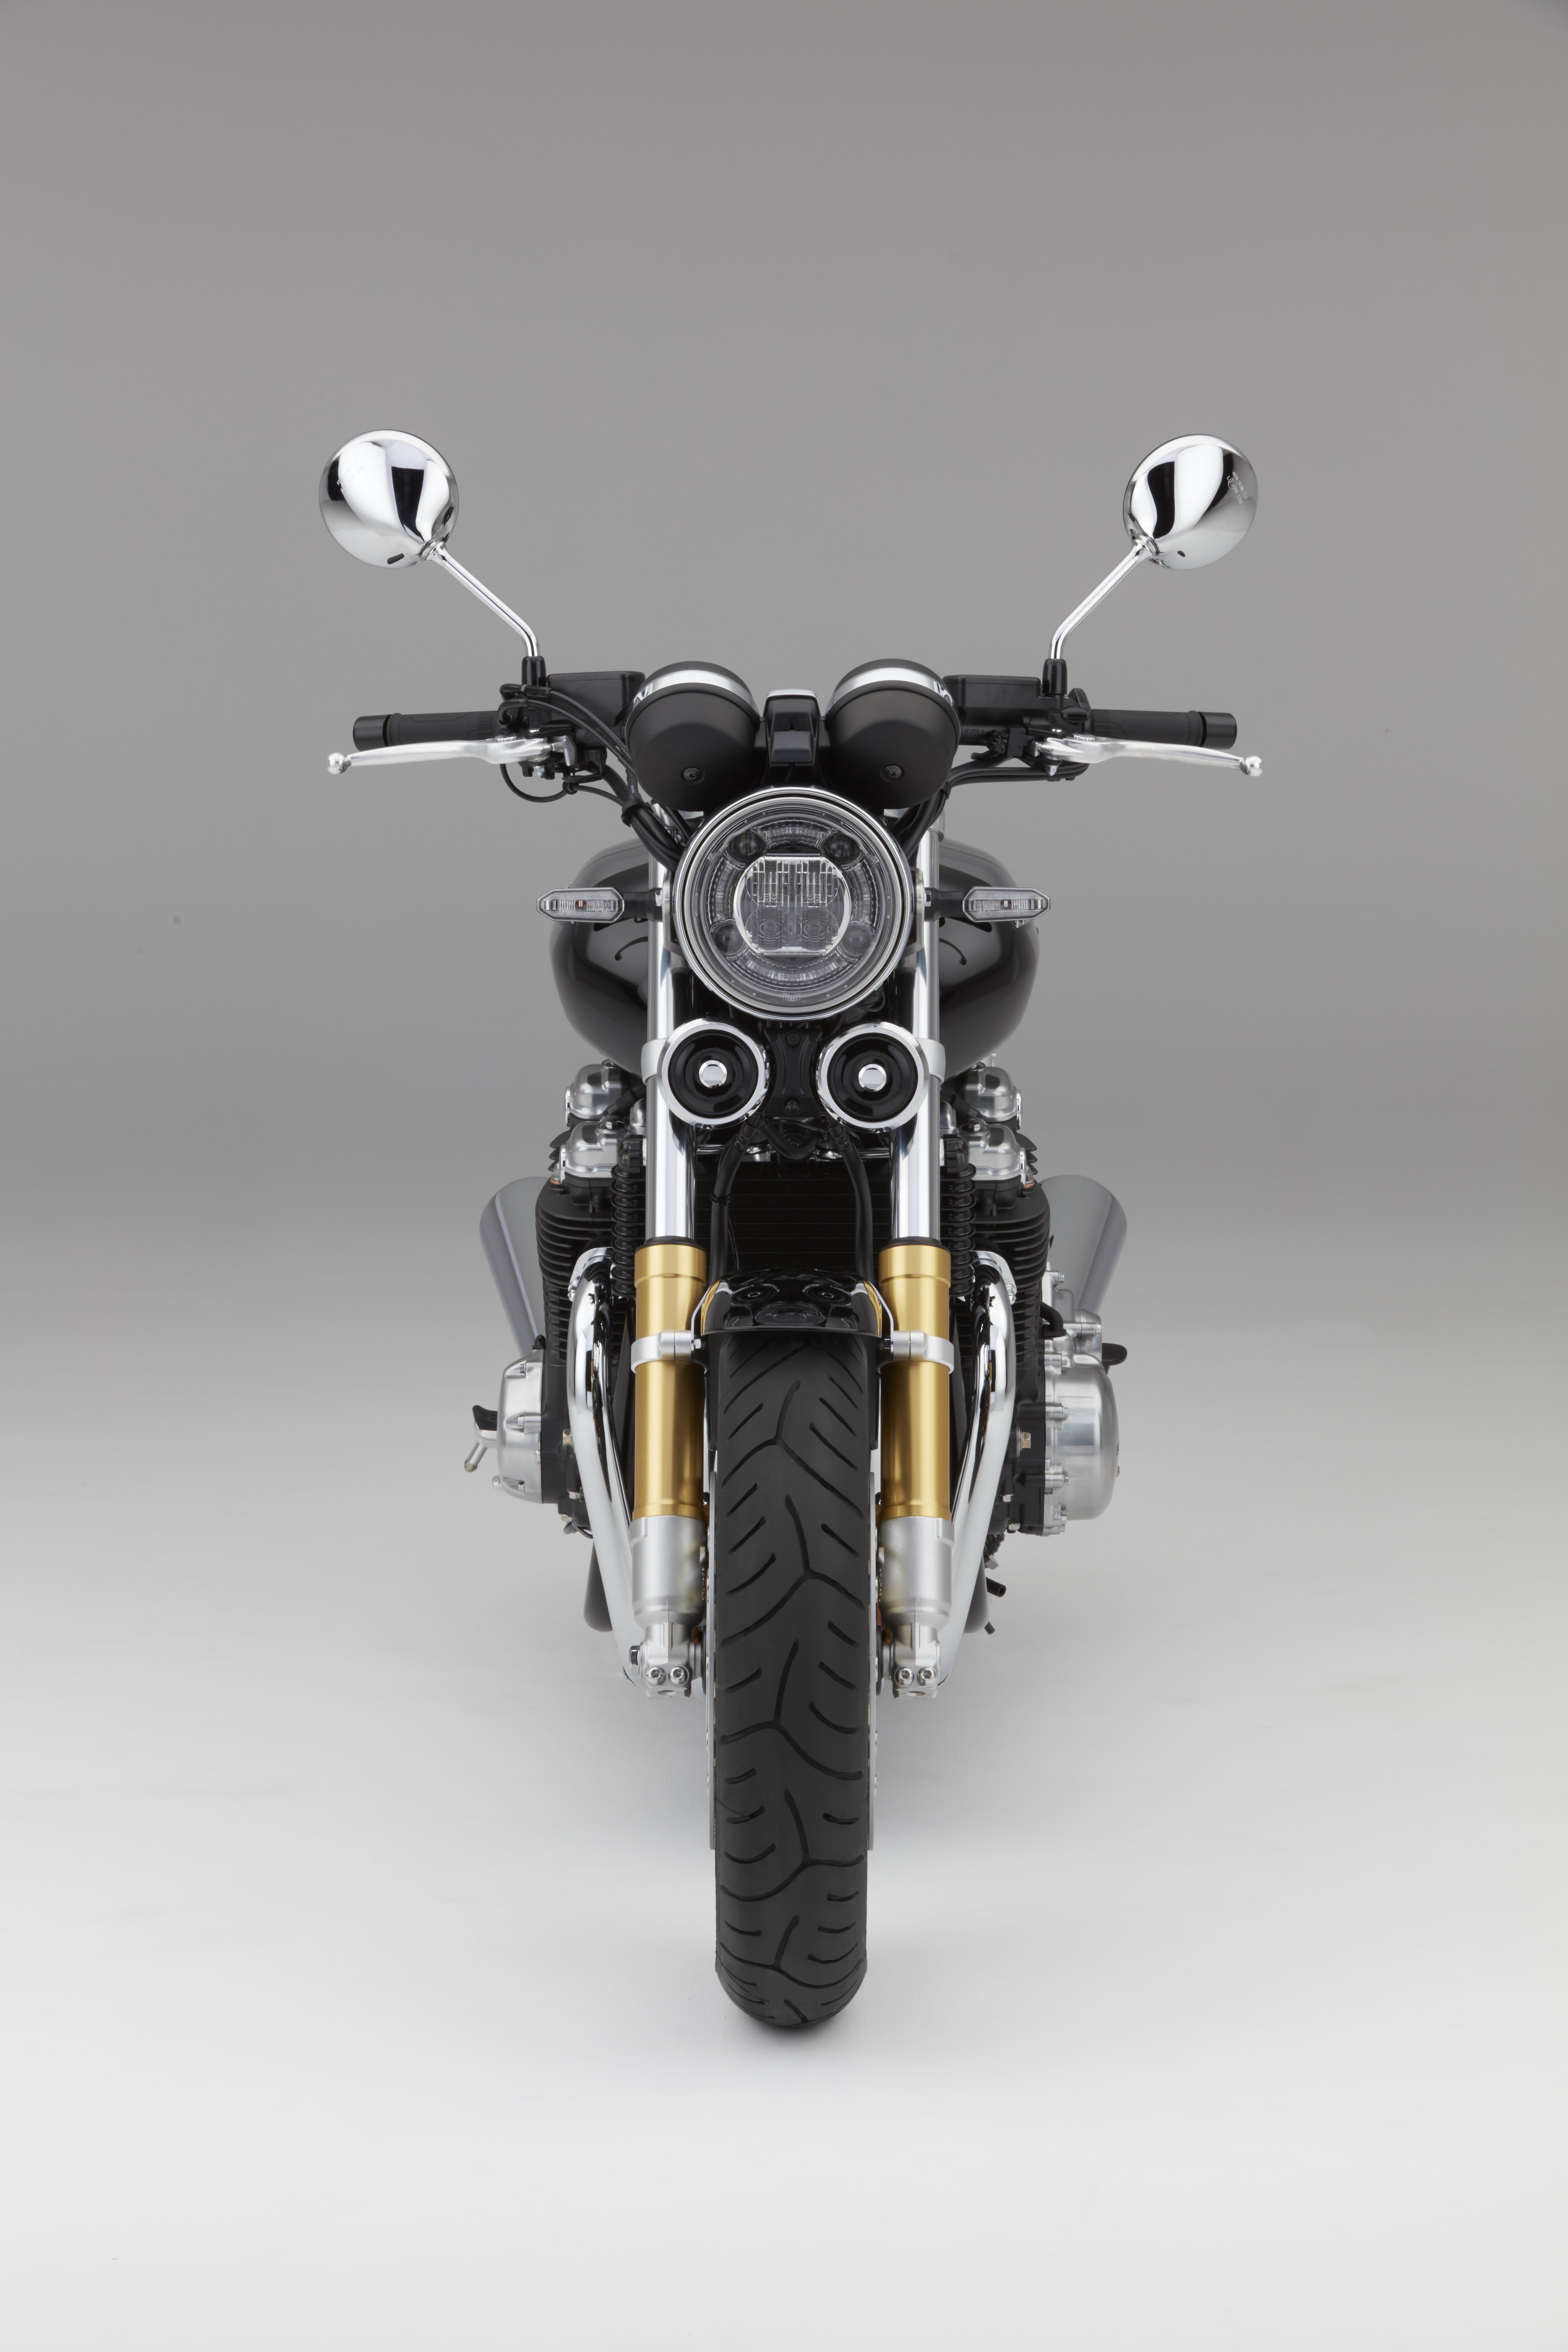 Honda reveals updated CB1100EX and new CB1100RS